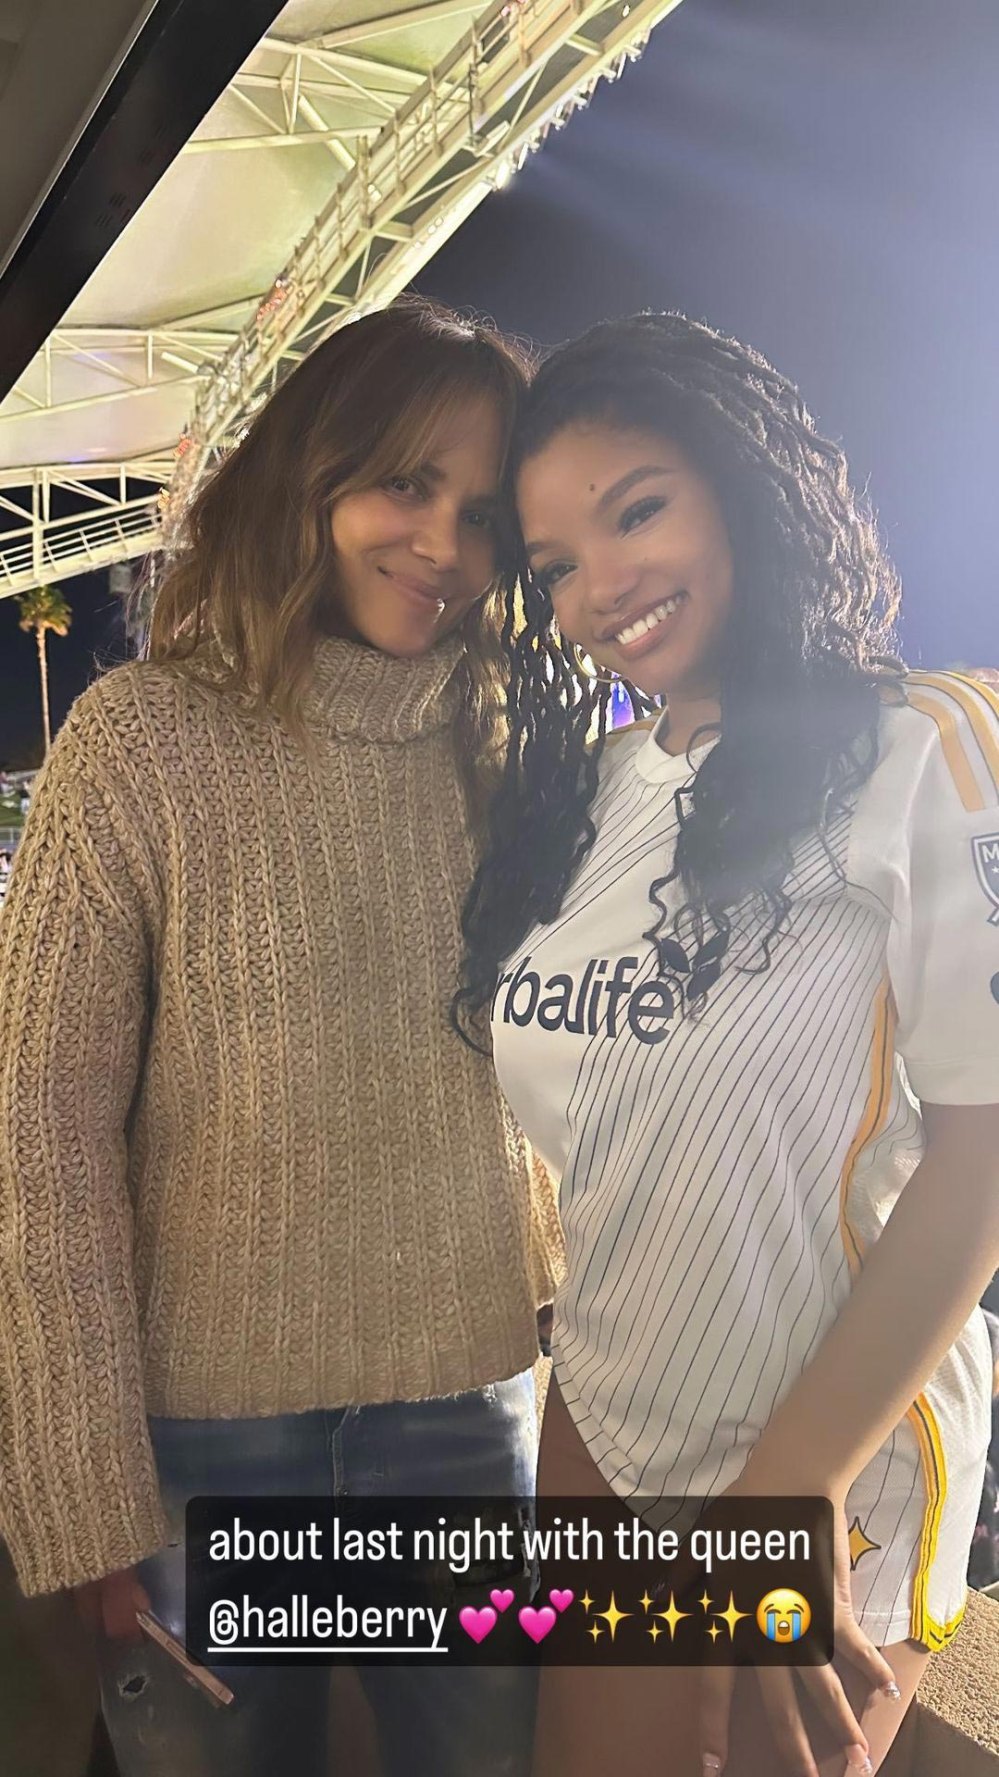 Halle Berry and Halle Bailey Pose Together in Sweet Snap